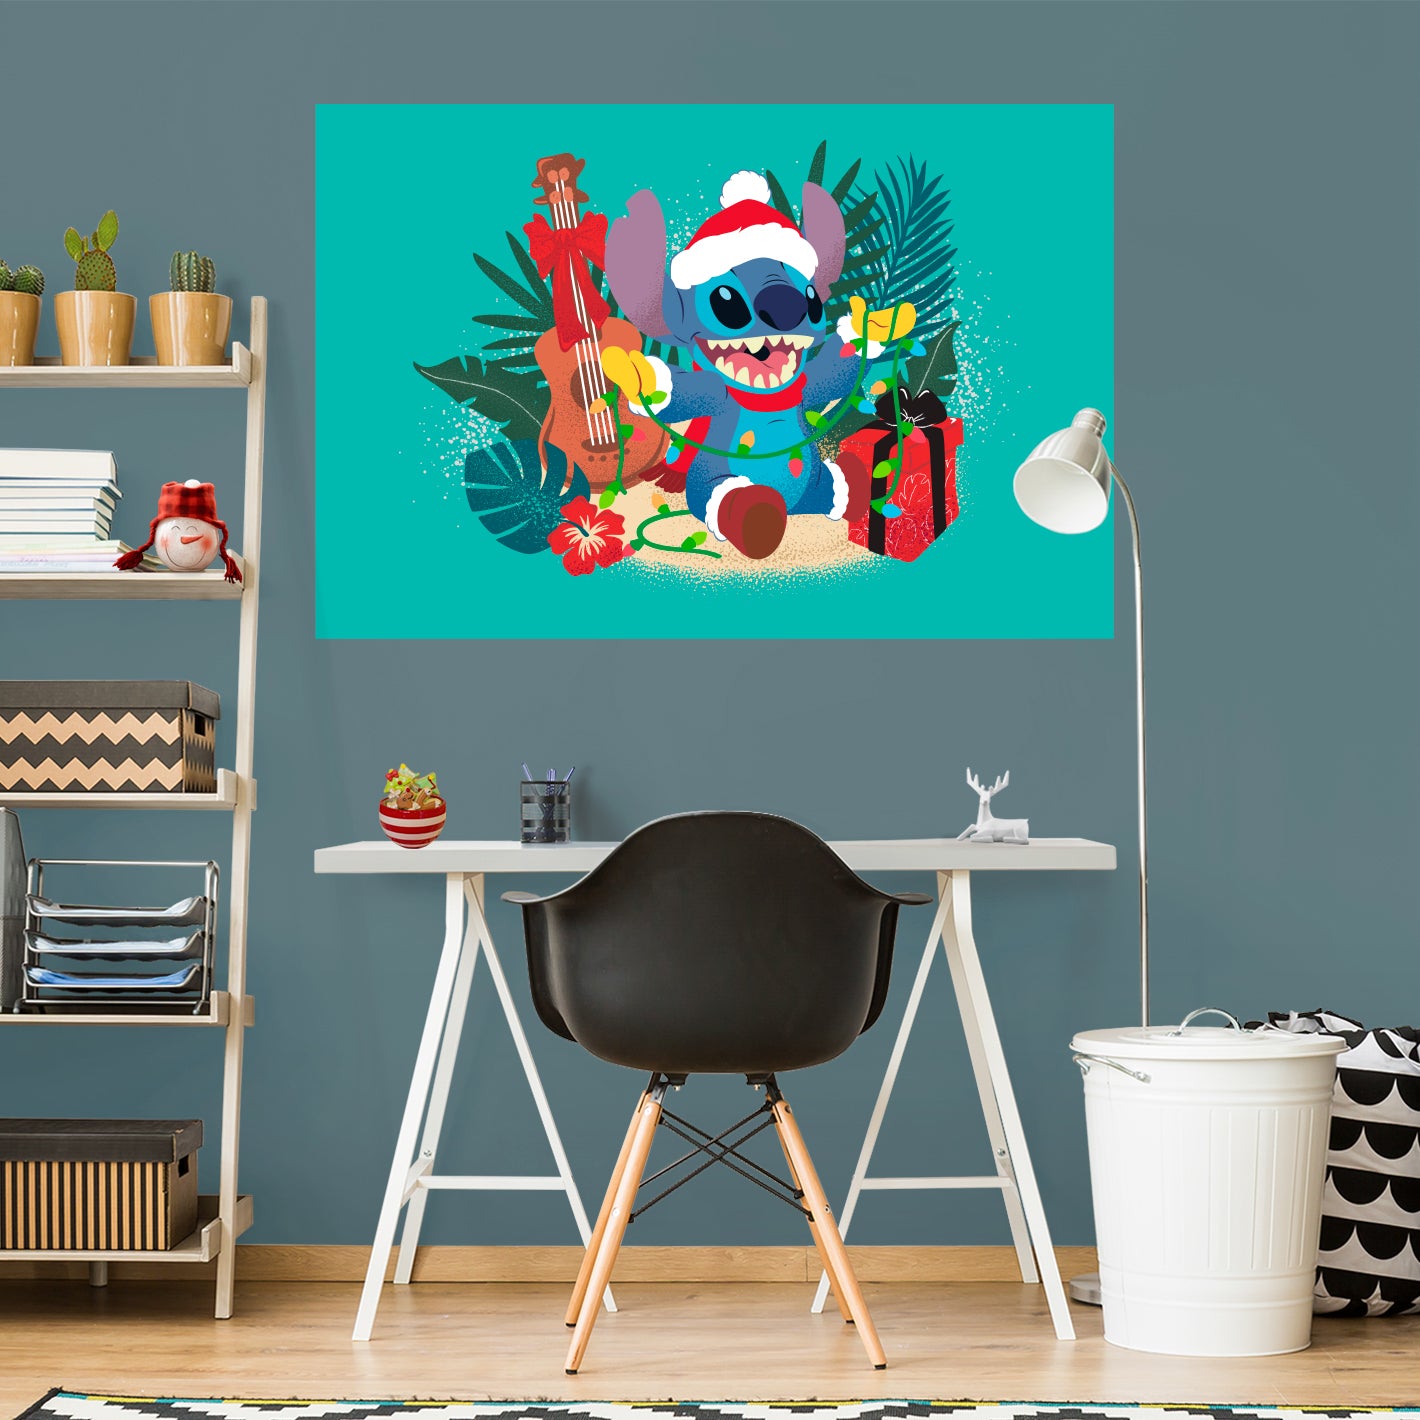 Lilo & Stitch Festive Cheer: Stitch Presents Mural        - Officially Licensed Disney Removable     Adhesive Decal